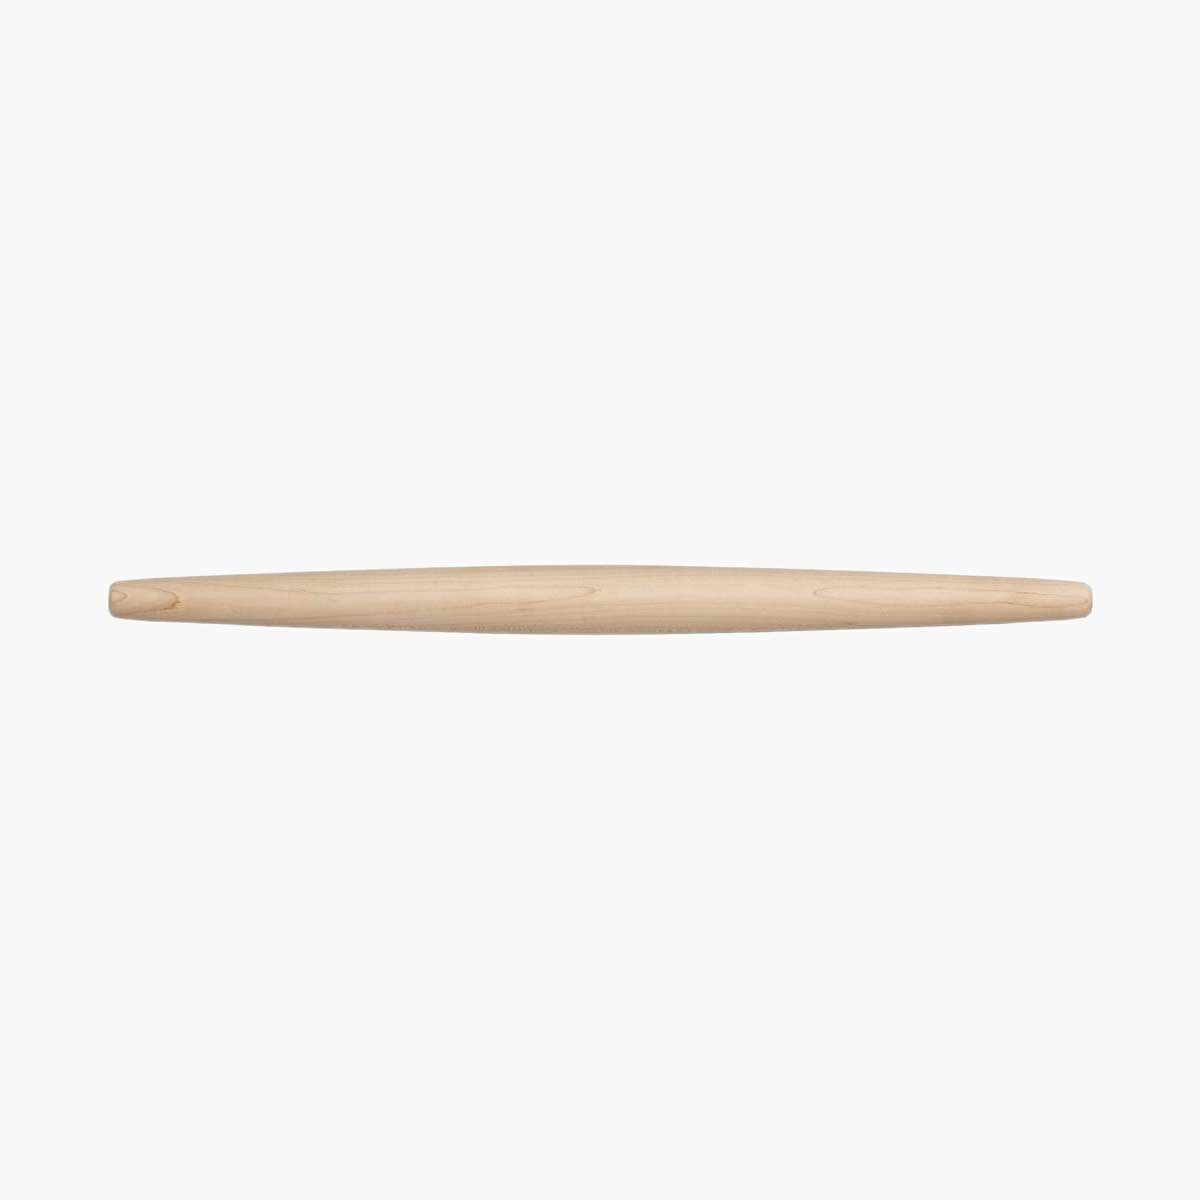 A tapered French rolling pin, as part of Kate McDermott's favorite kitchen things.